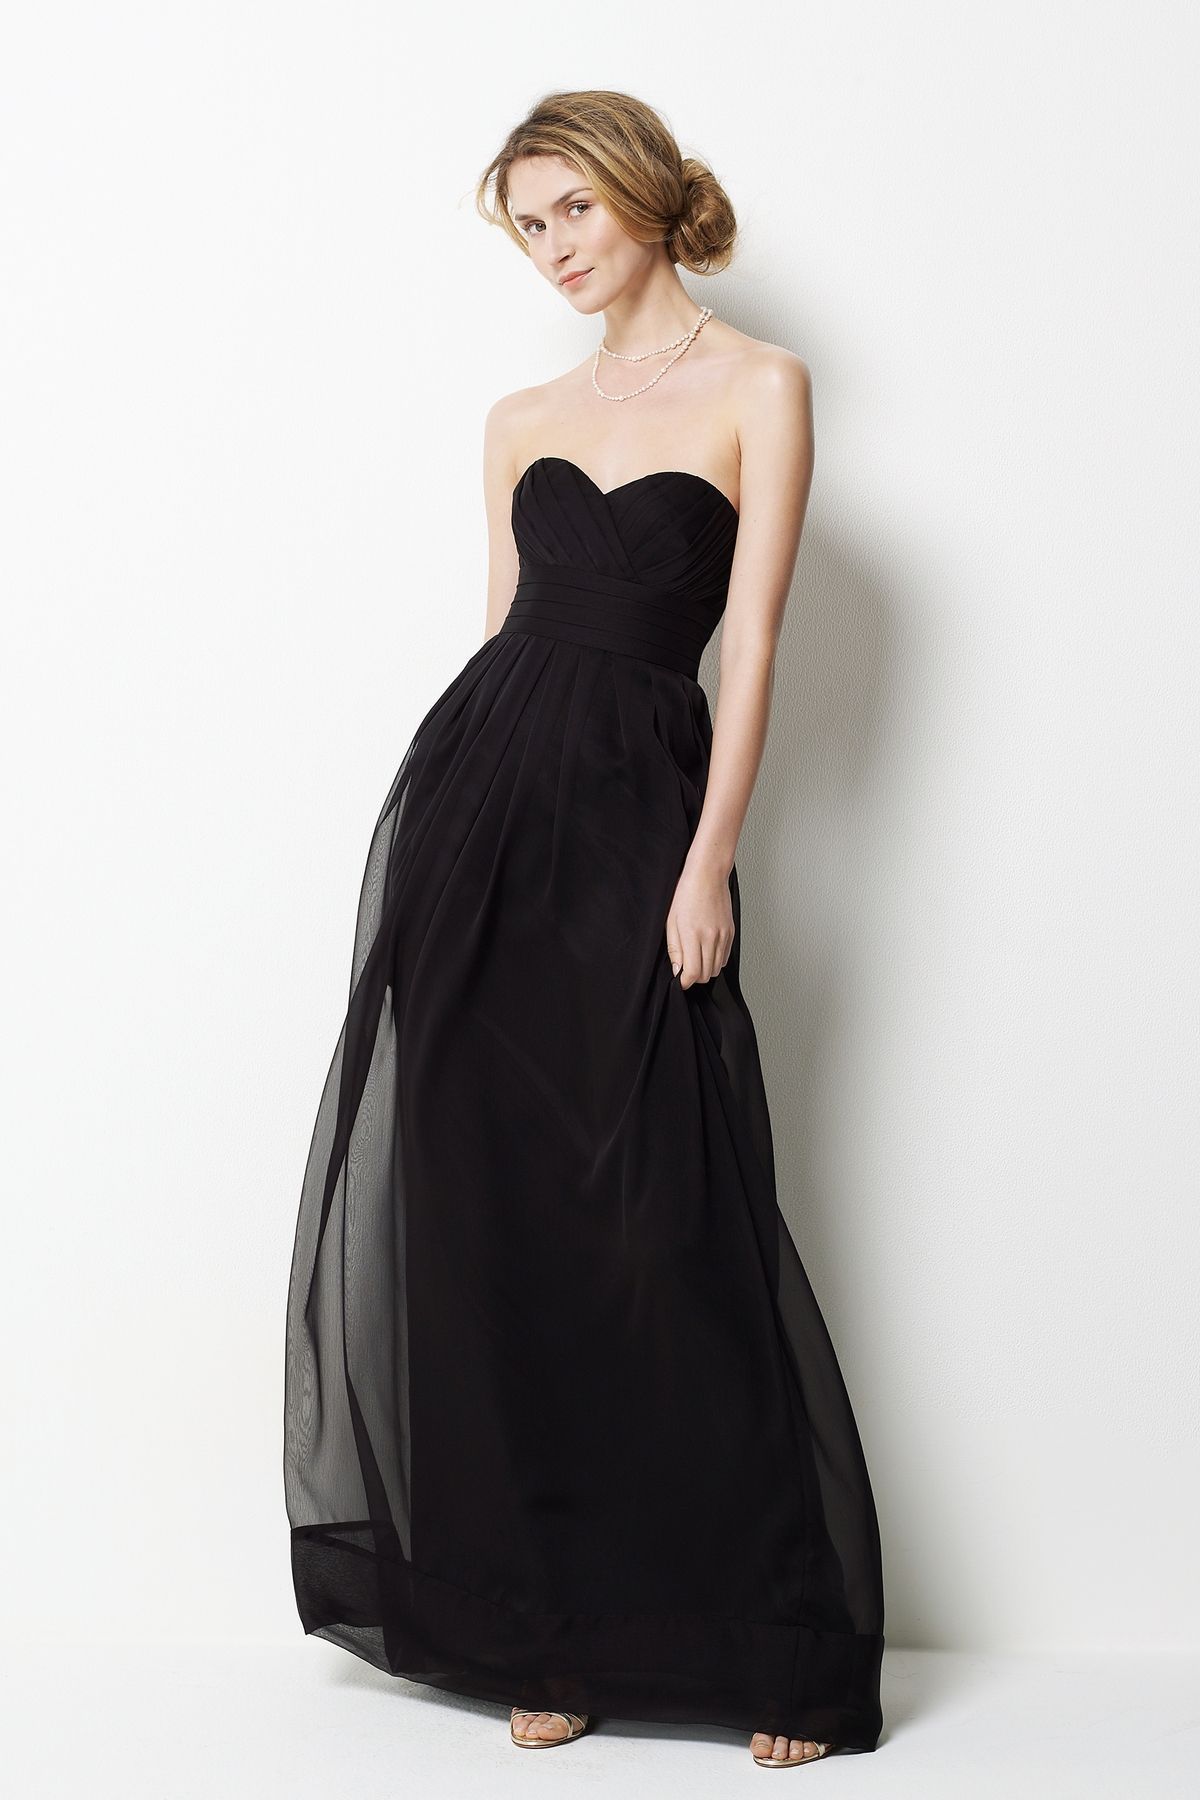 Sweetheart neck with empire waist floor-length chiffon gown